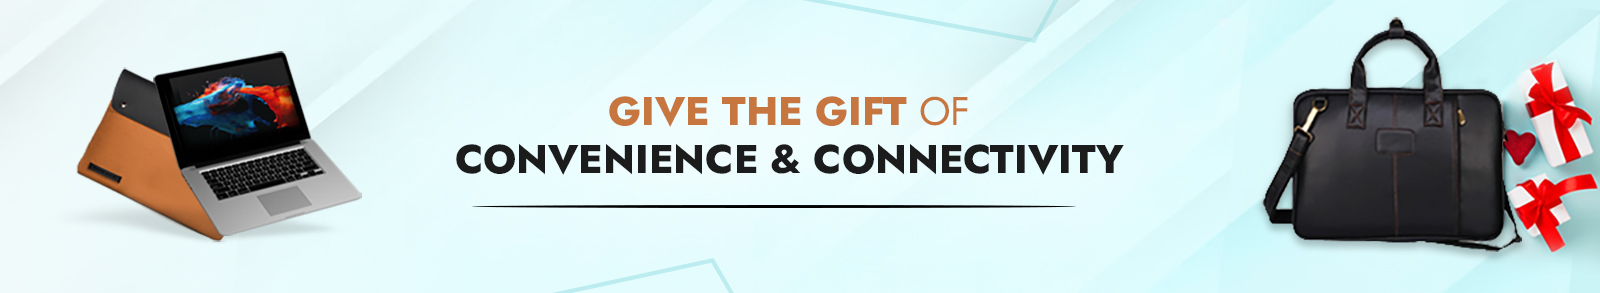 Give The Gift Of Convenience & Connectivity